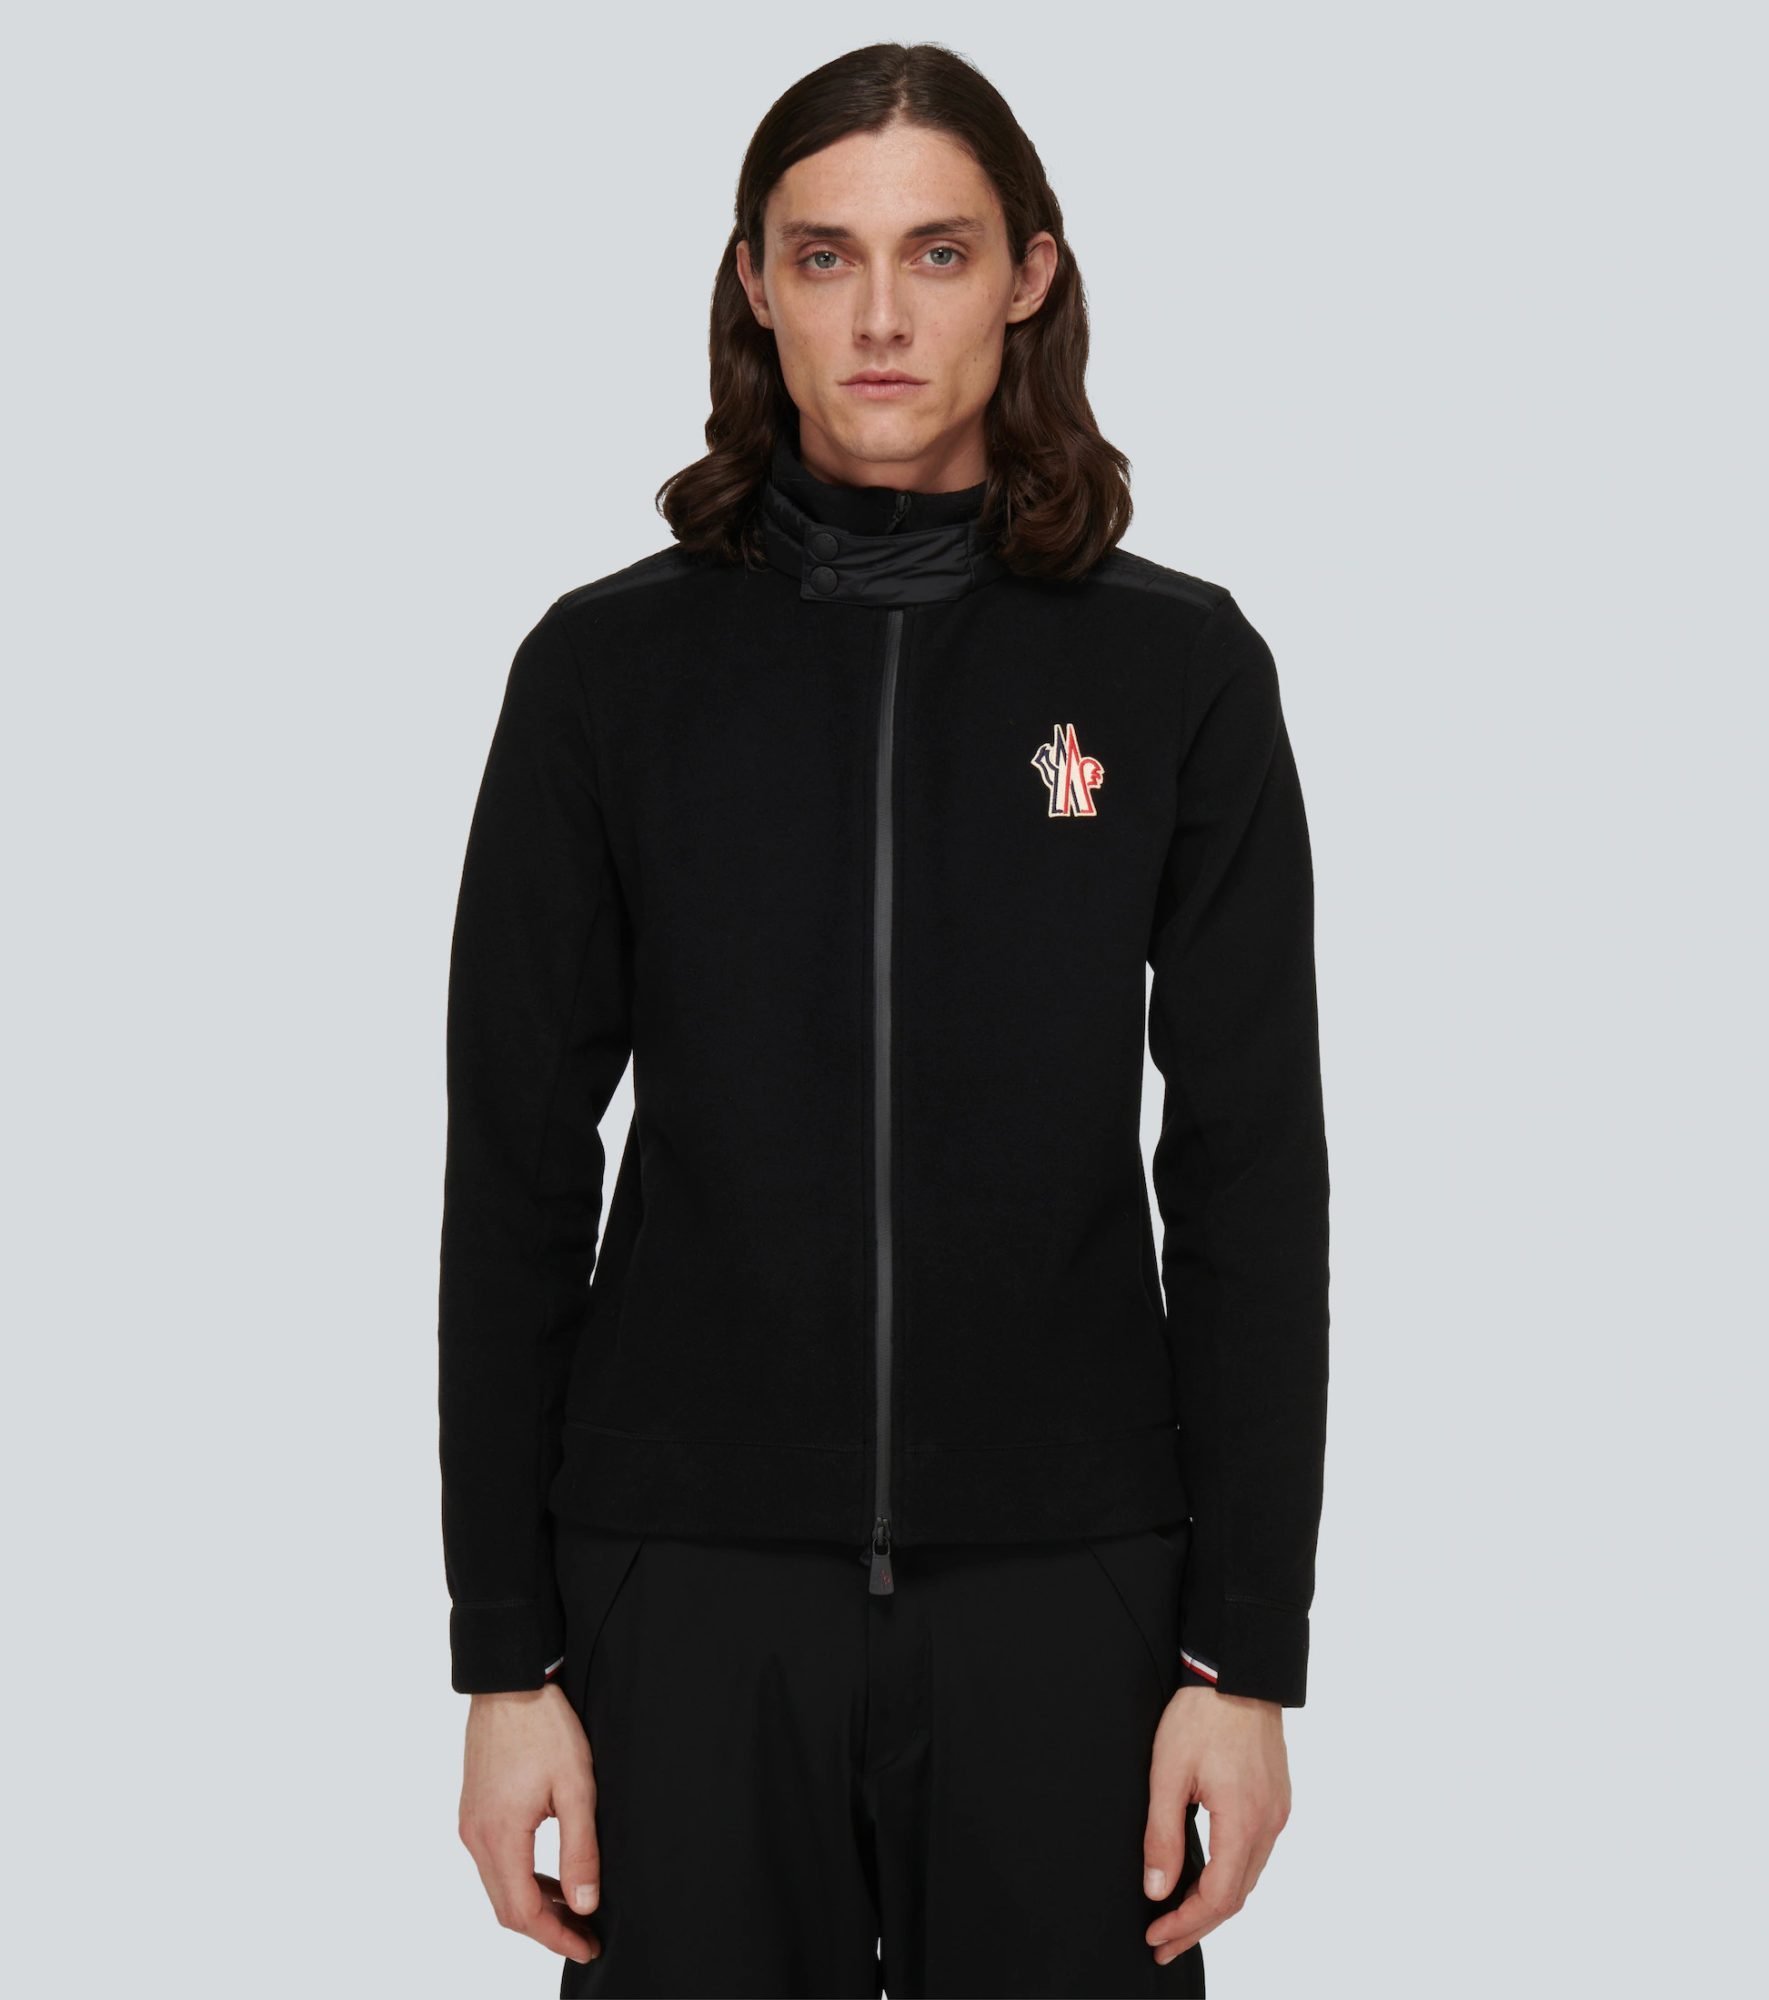 black zipped cardigan by Moncler Grenoble